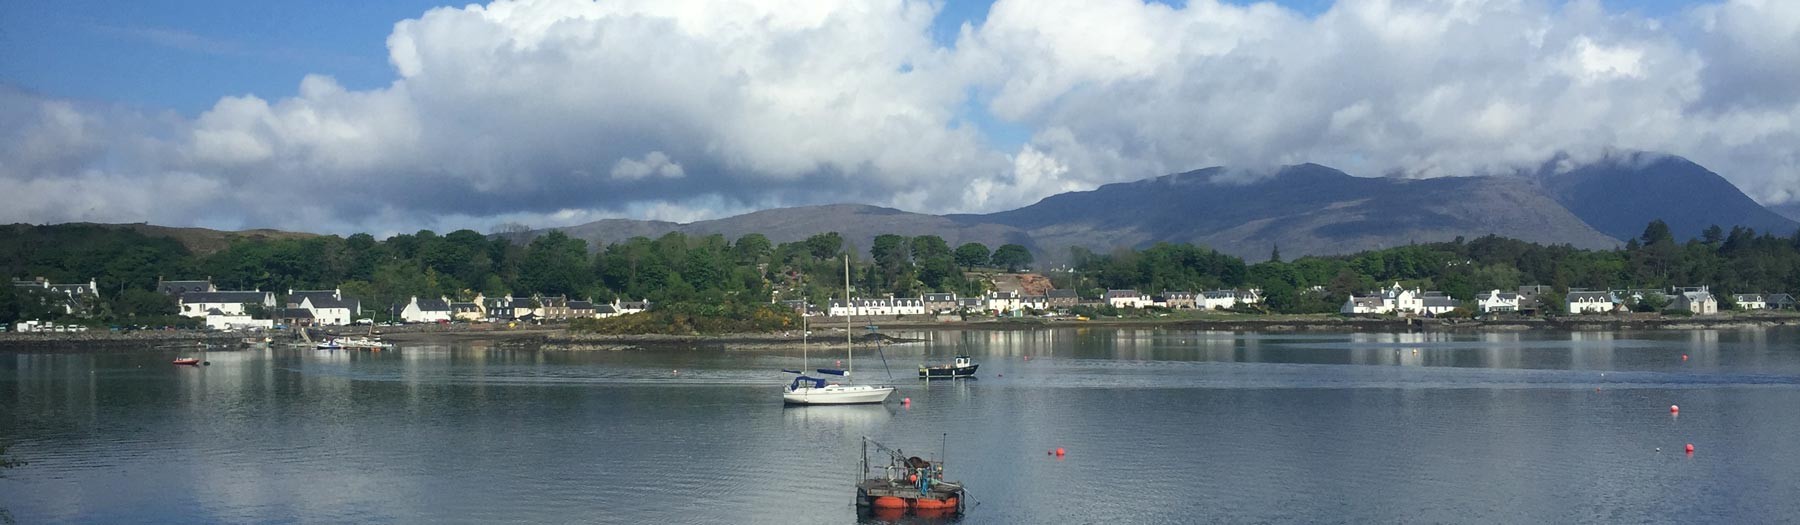 View of Plockton from the train on the Kyle Line